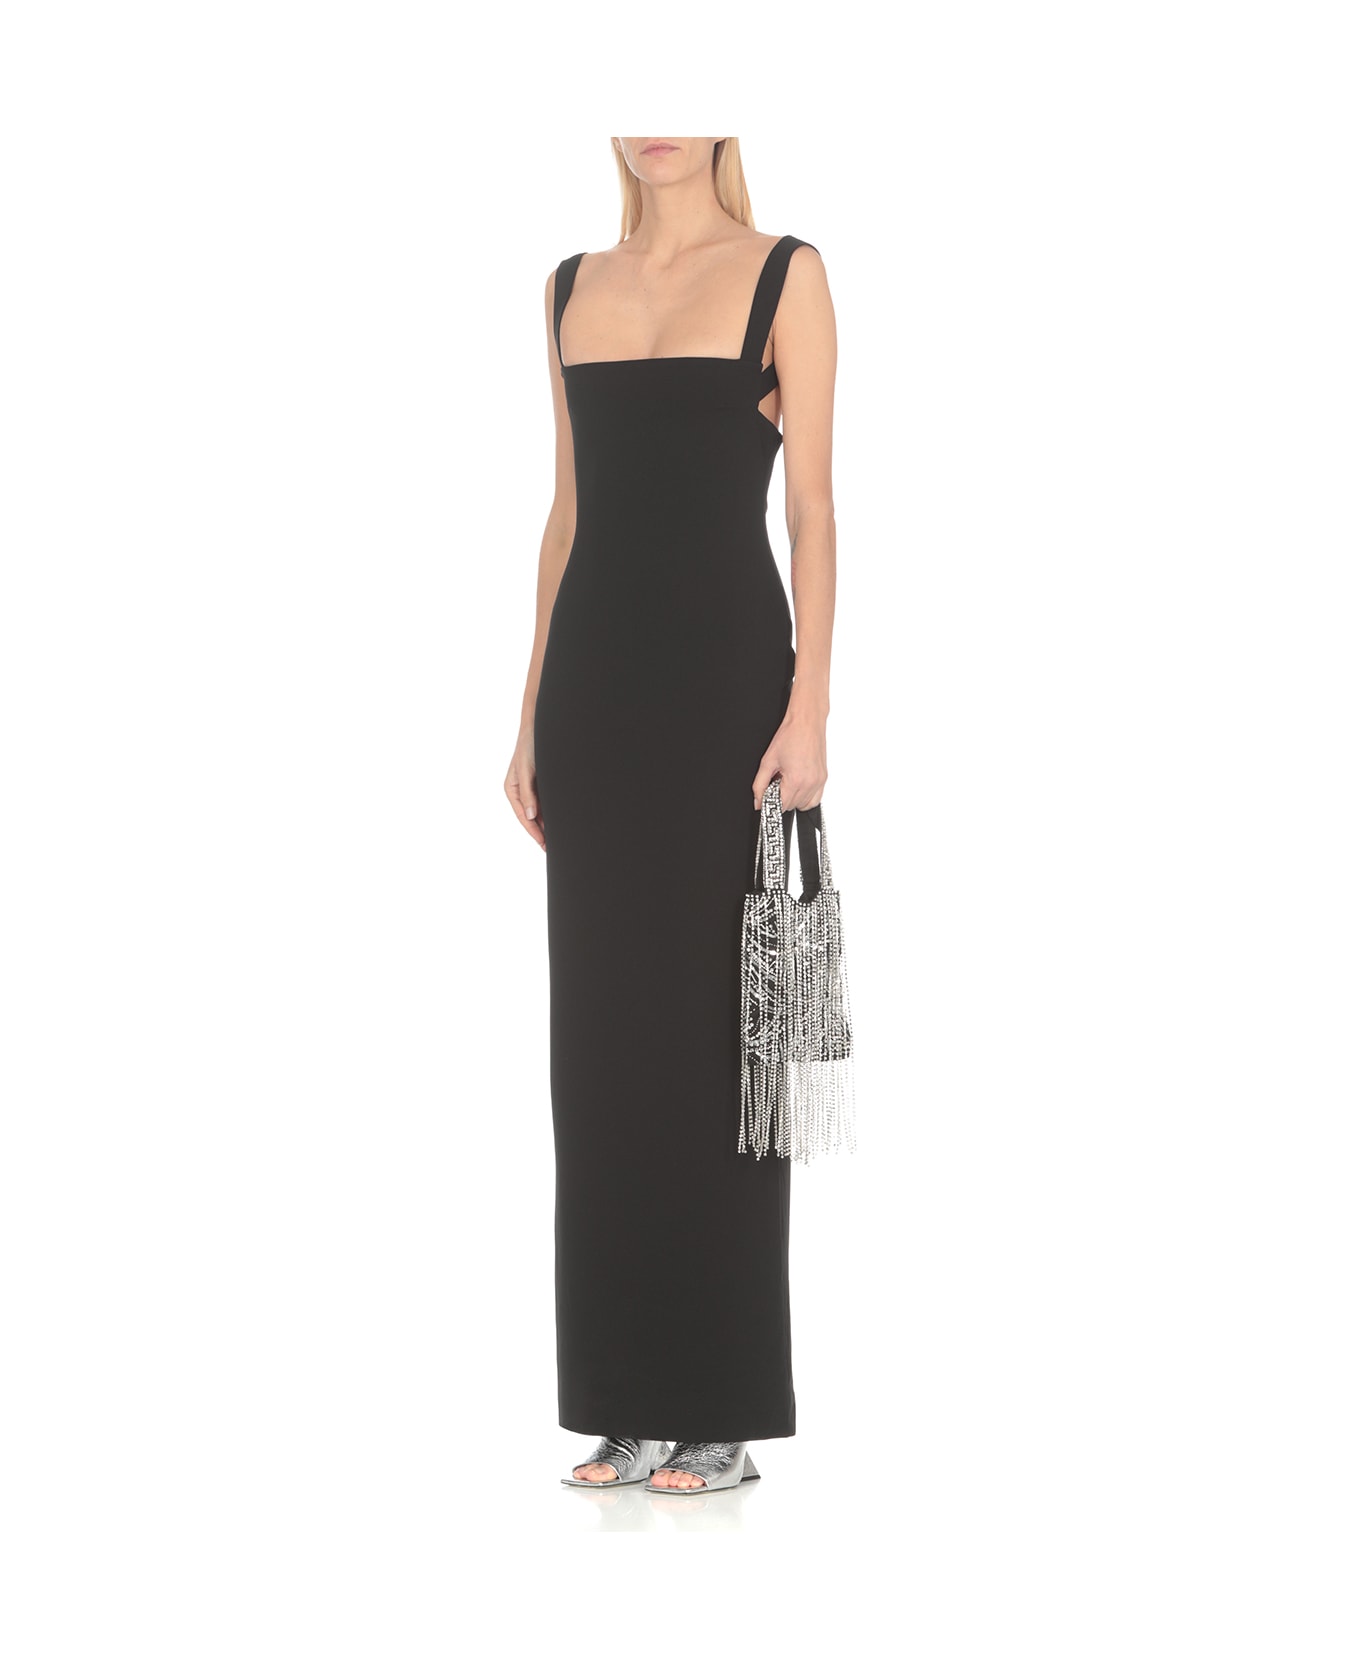 Solace London 'joni' Black Maxi Dress With Square Neck And Open Back Woman - Black ワンピース＆ドレス